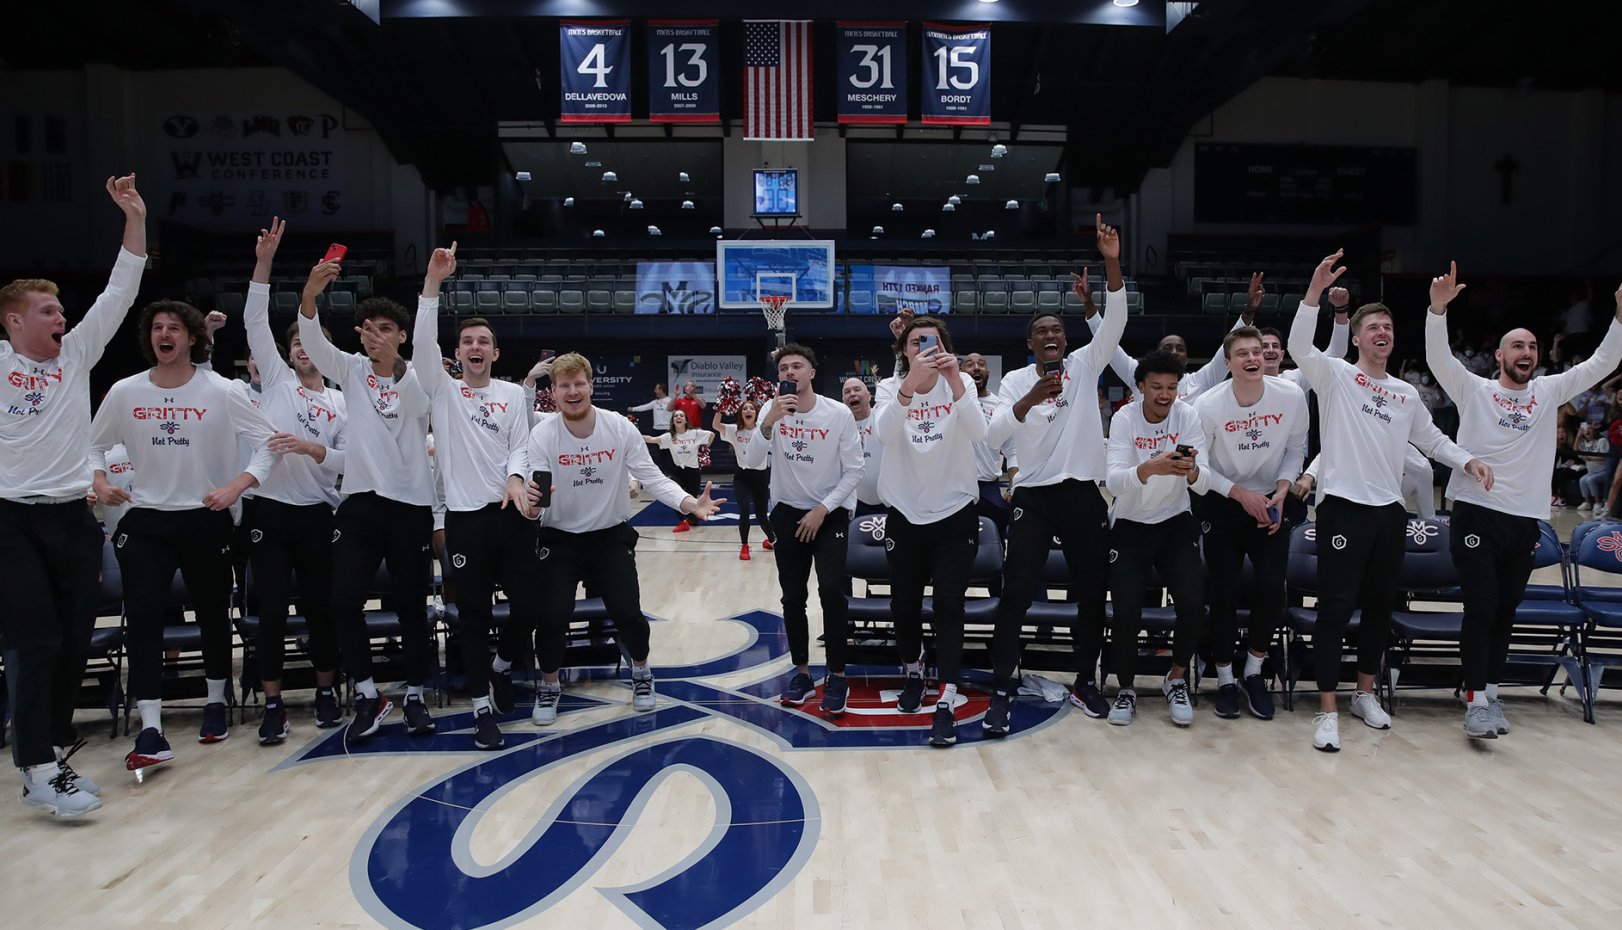 Join Fellow Gaels for the NCAA Selection Show Watch Party March 12 Saint Marys College